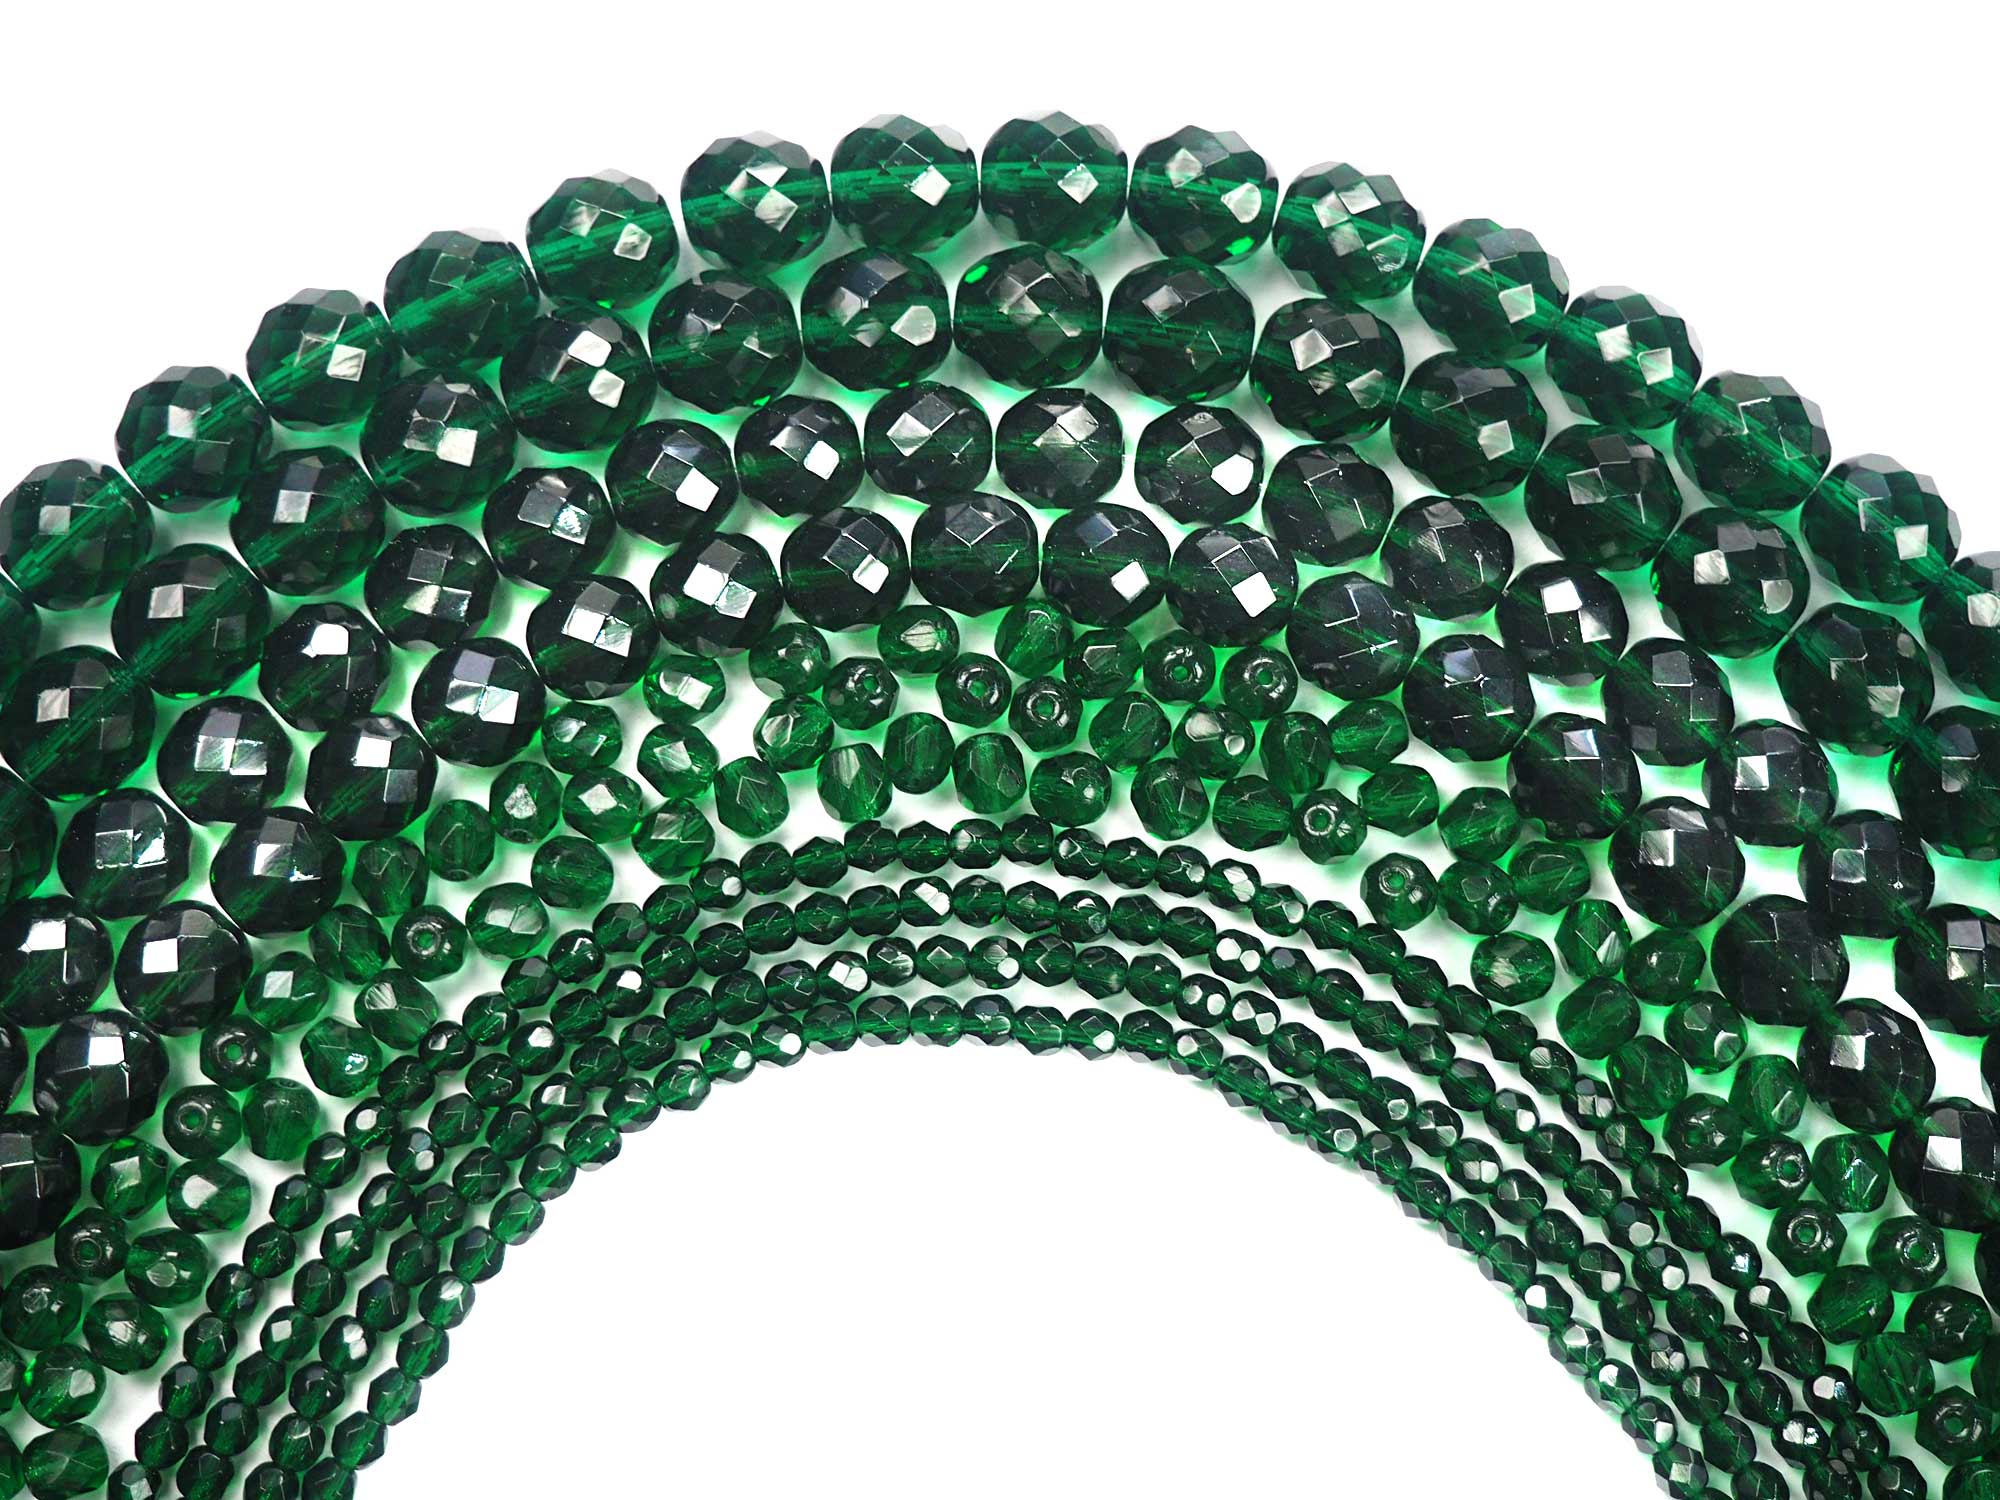 Medium Emerald green, Czech Fire Polished Round Faceted Glass Beads, 16 inch strand